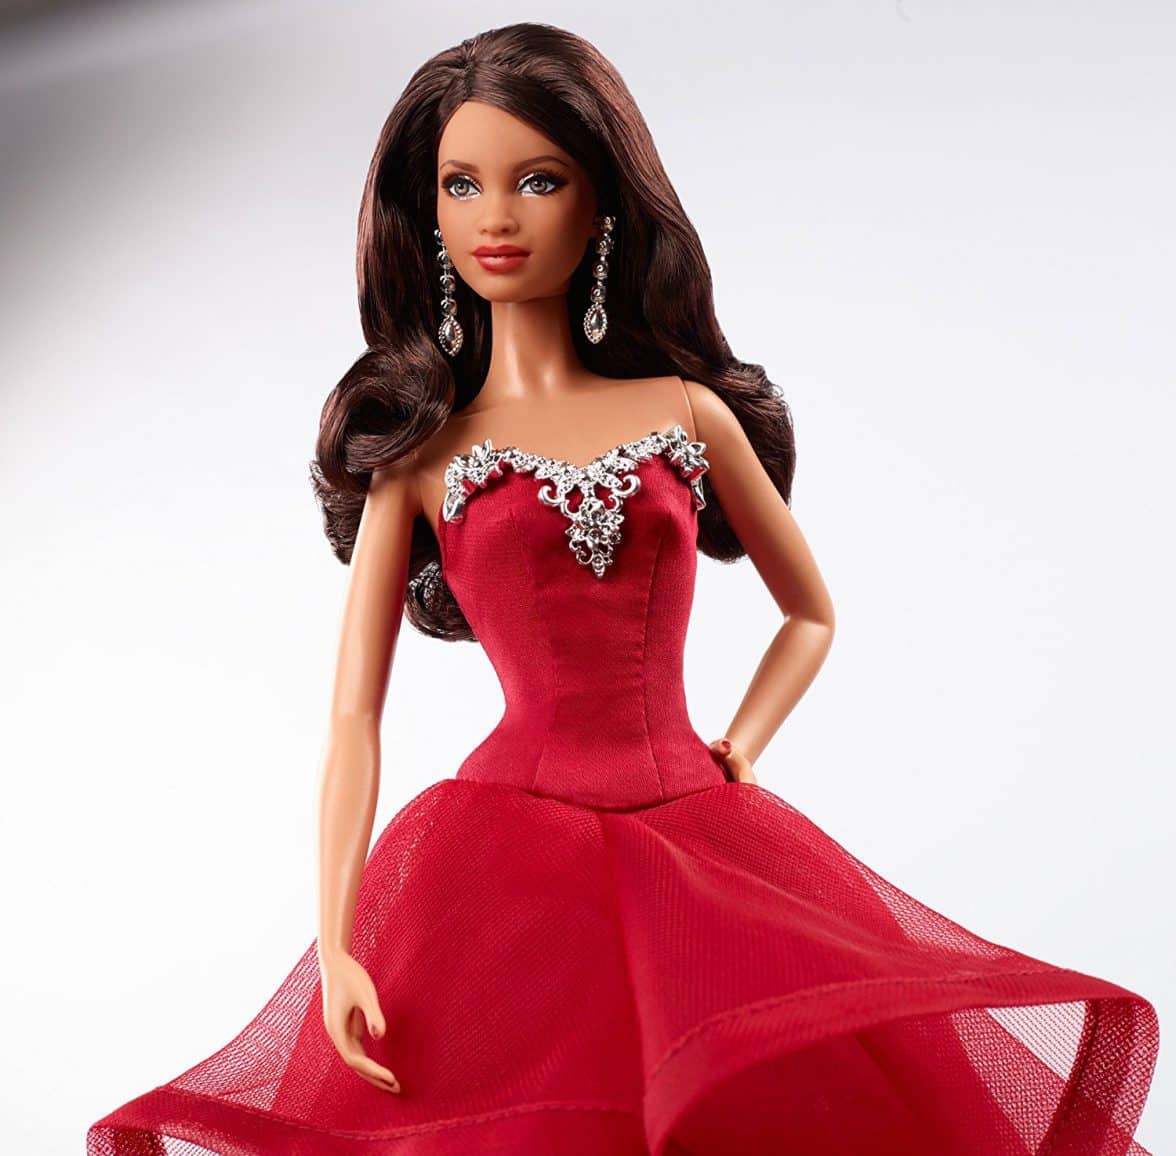 Barbie Collector 2015 Holiday African-American Doll